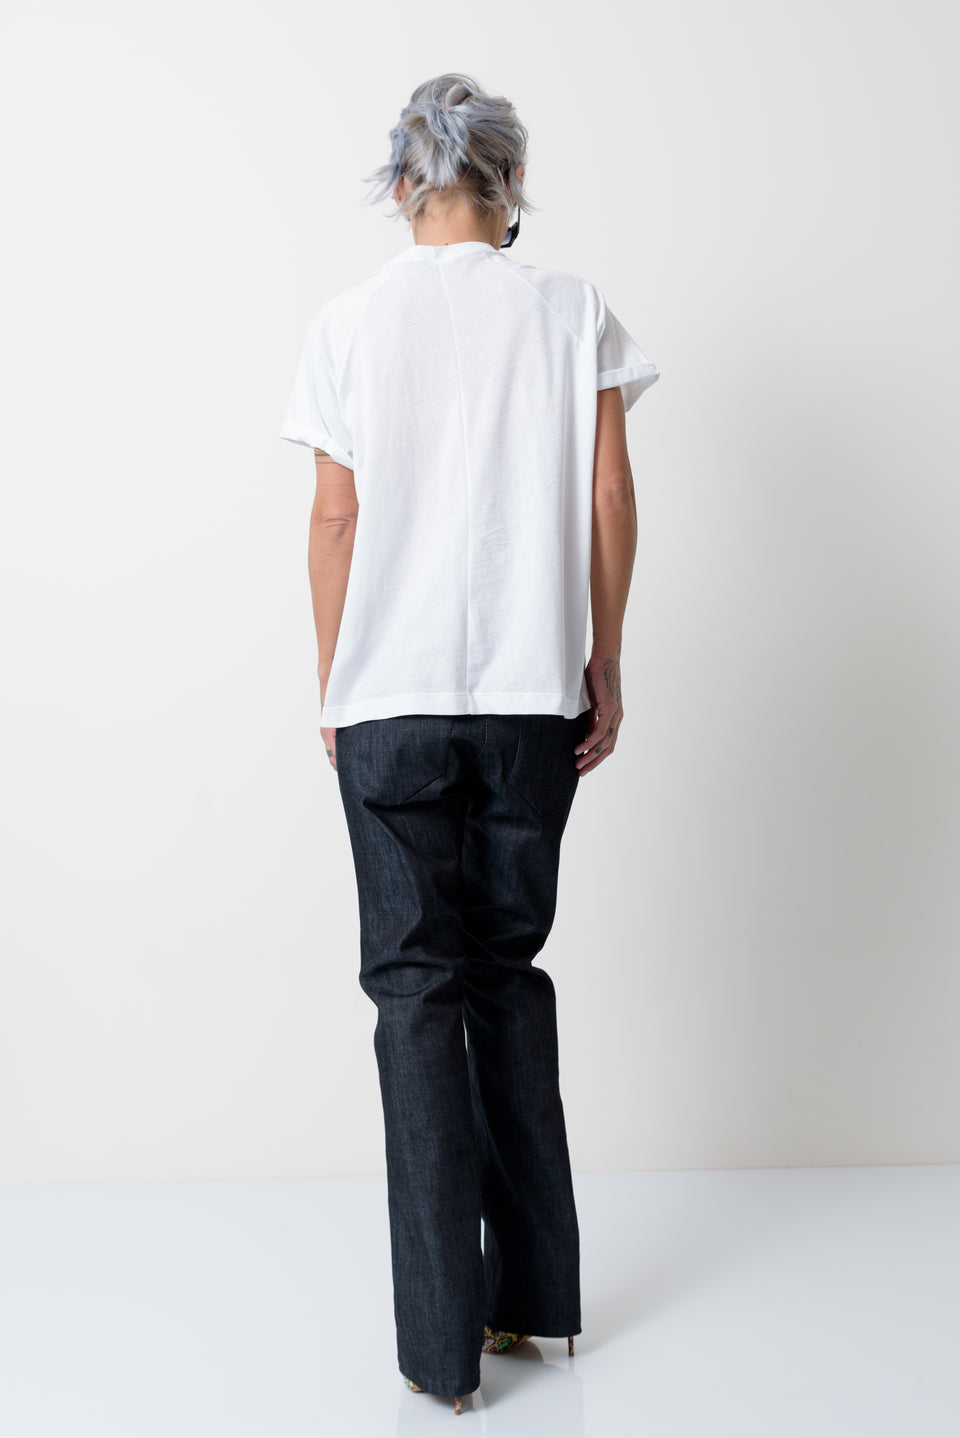 White T Shirt Blouse with Front Leatherette Pocket - Clothes By Locker Room